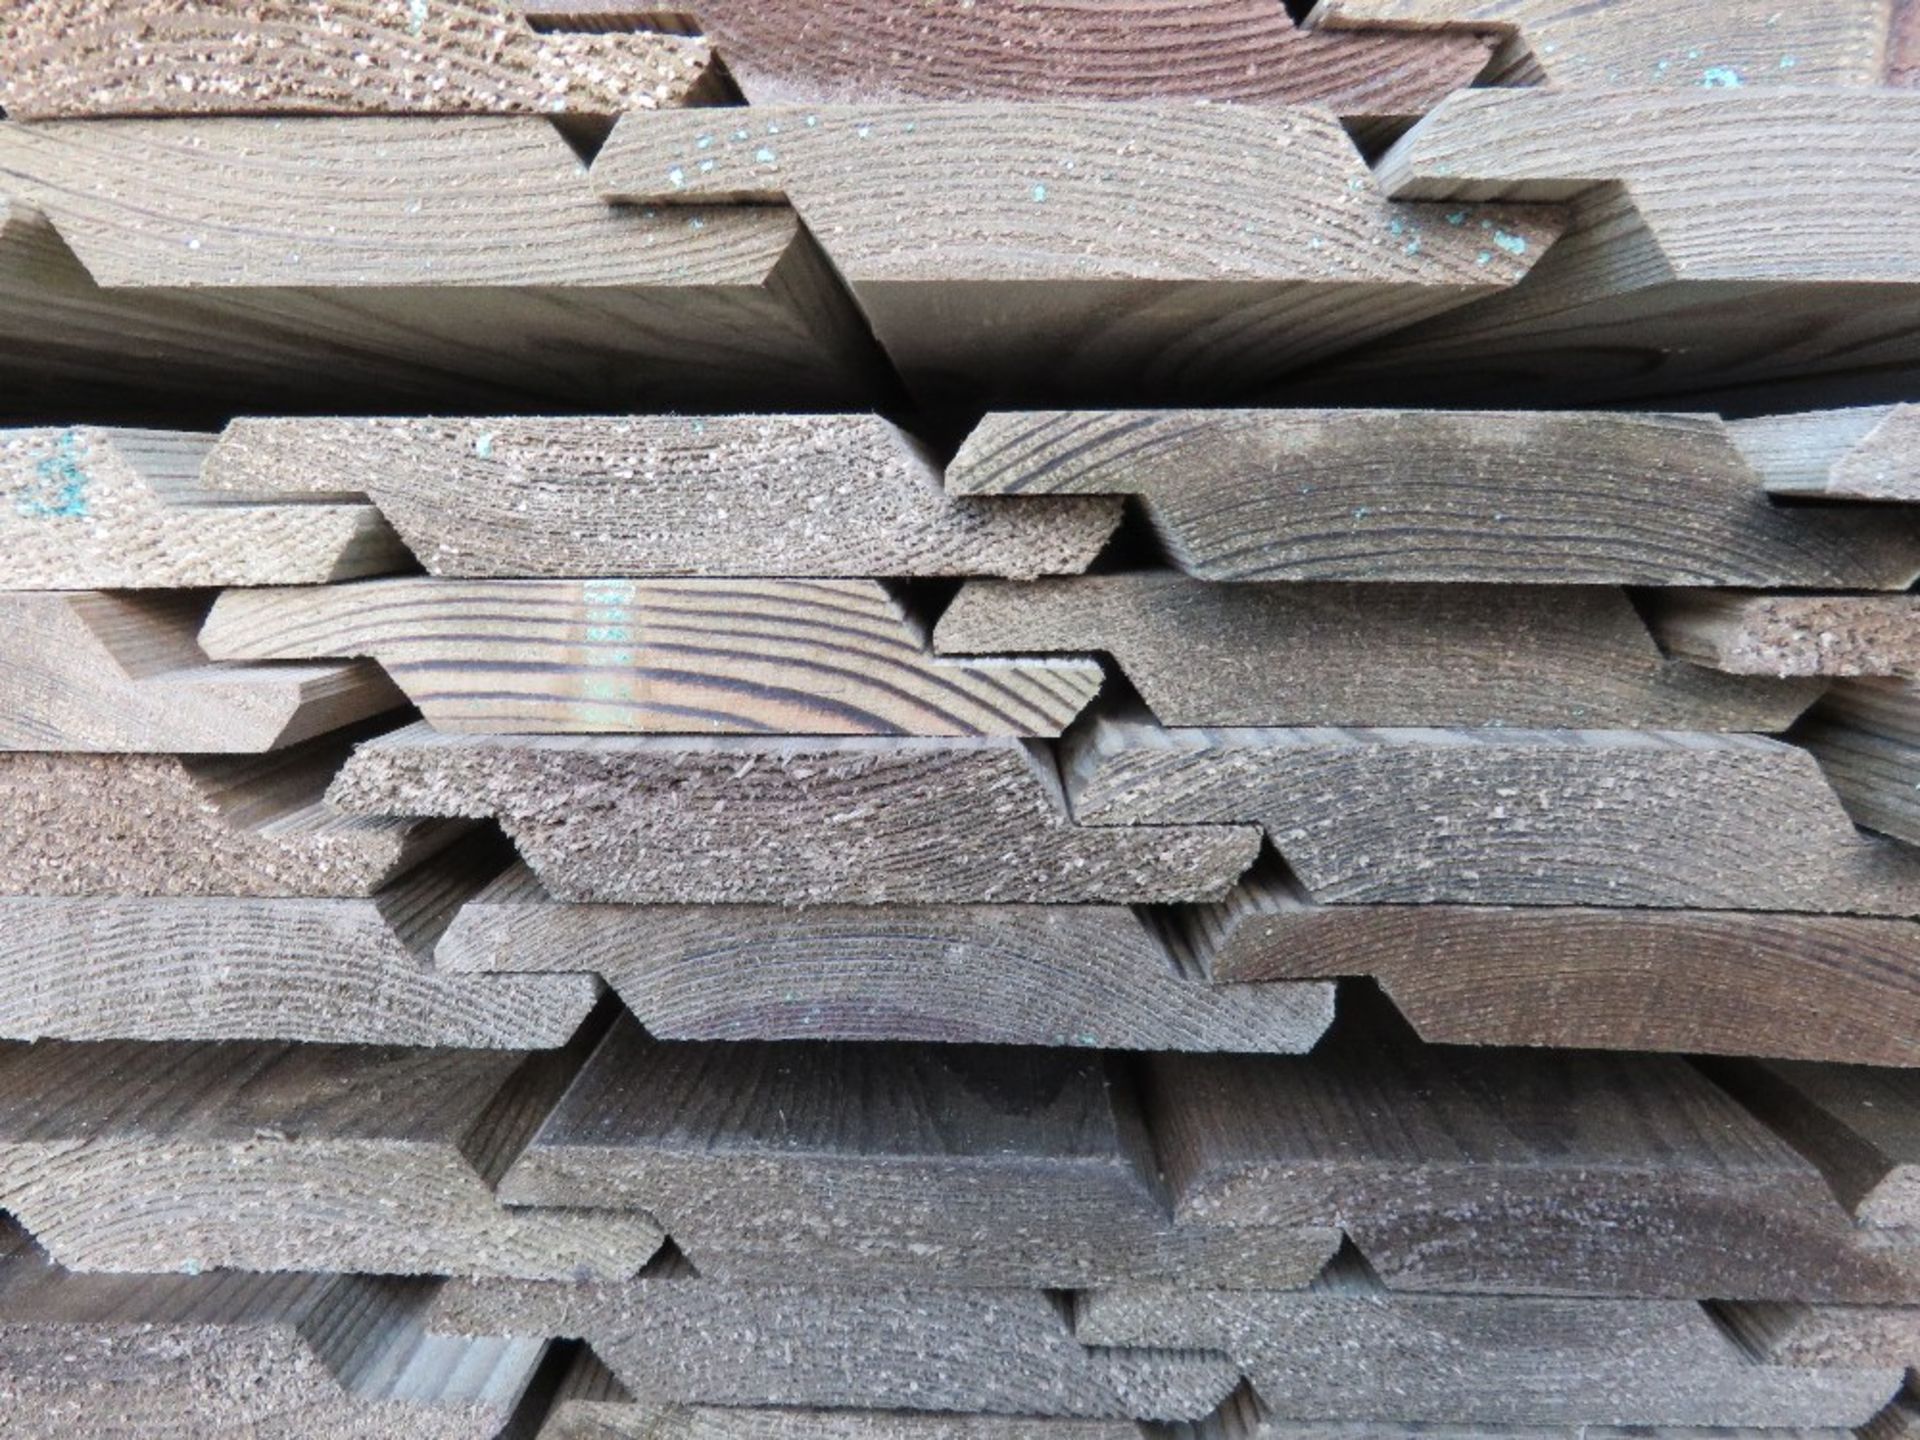 PACK OF PRESSURE TREATED SHIPLAP CLADDING TIMBER BOARDS. 100MM WIDTH APPROX. - Image 3 of 3